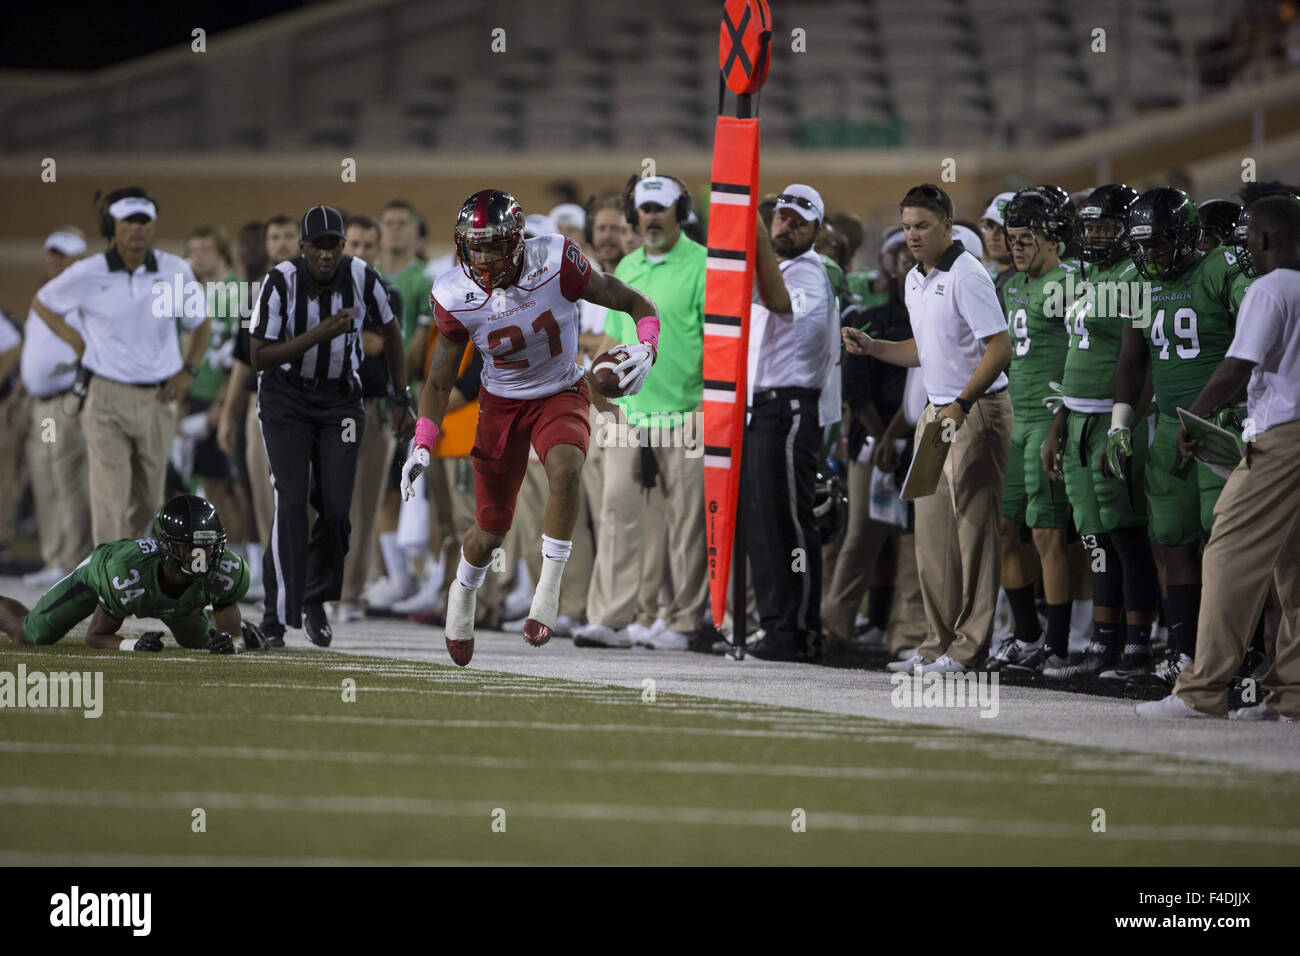 Denton, Texas, USA. 15th Oct, 2015. October 15, 2015: wide receiver Jared Dangerfield (21) of the Western Kentucky during the NCAA football game between the Western Kentucky Hilltopers and North Texas Mean Green at Apogee Stadium in Denton, Texas. JP Waldron/ZumaPress © Jp Waldron/ZUMA Wire/Alamy Live News Stock Photo